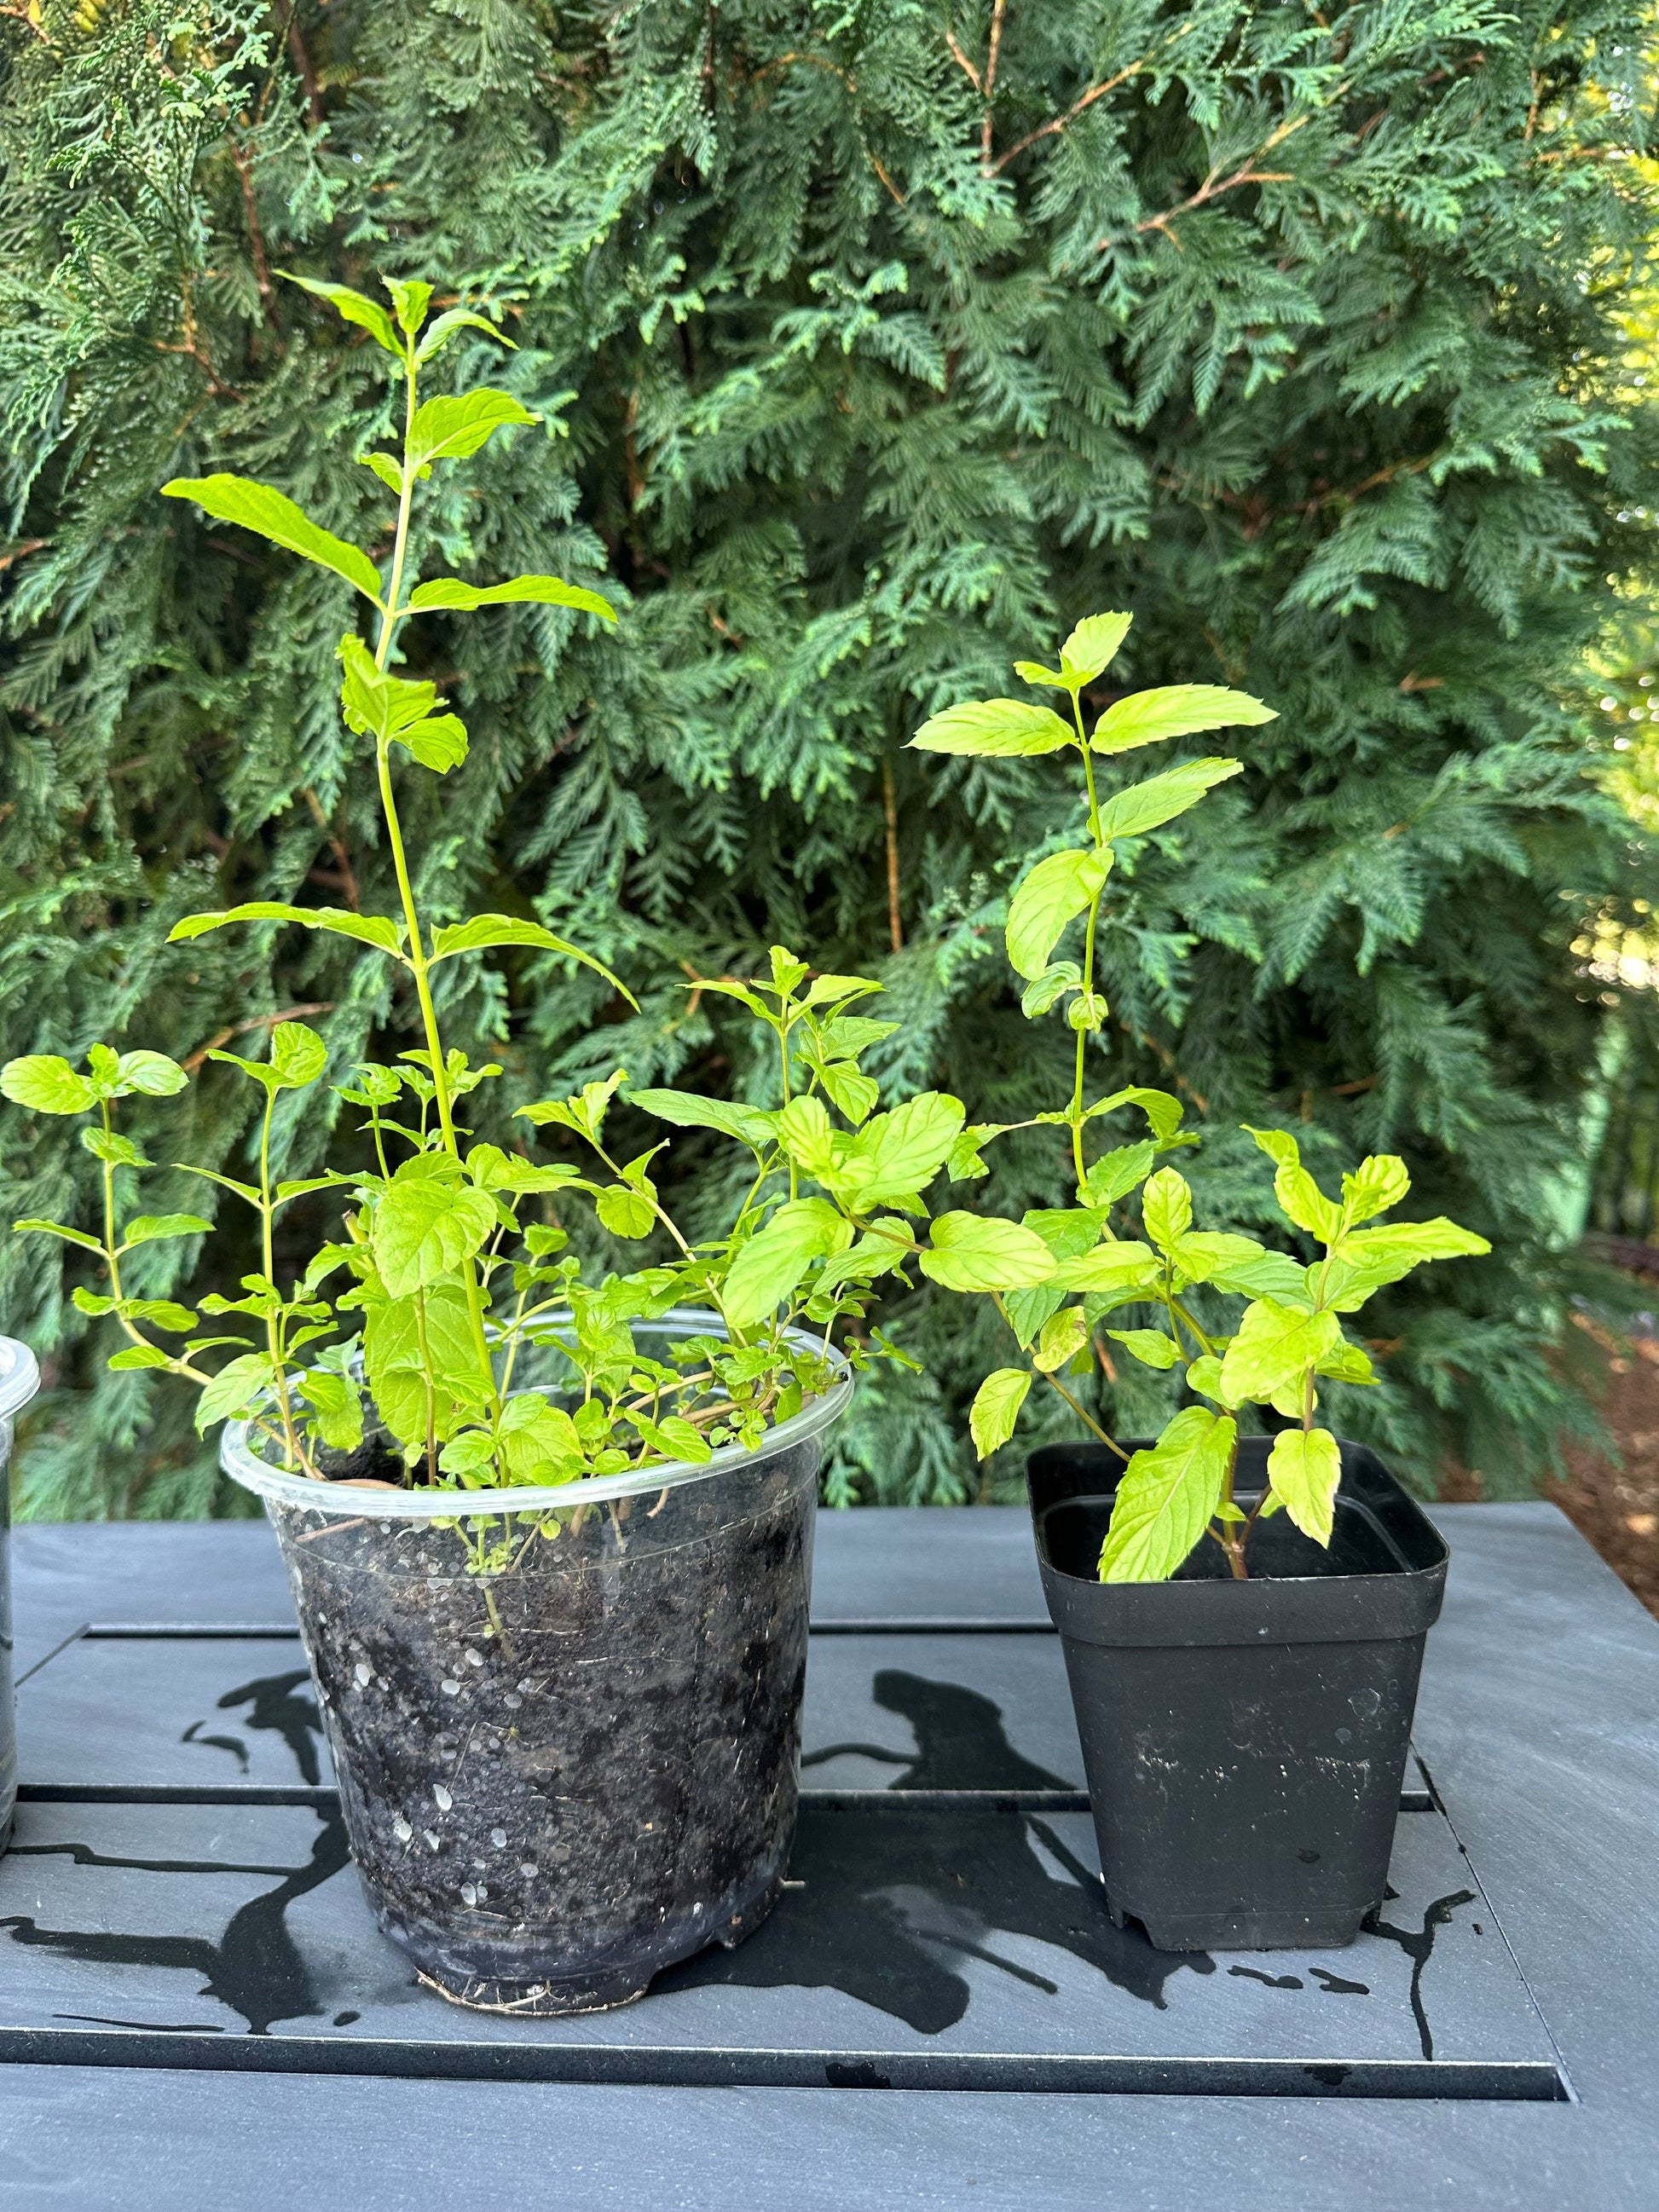 Medium size mint plant in 6 inch pot compared with regular size plant in 4 inch pot